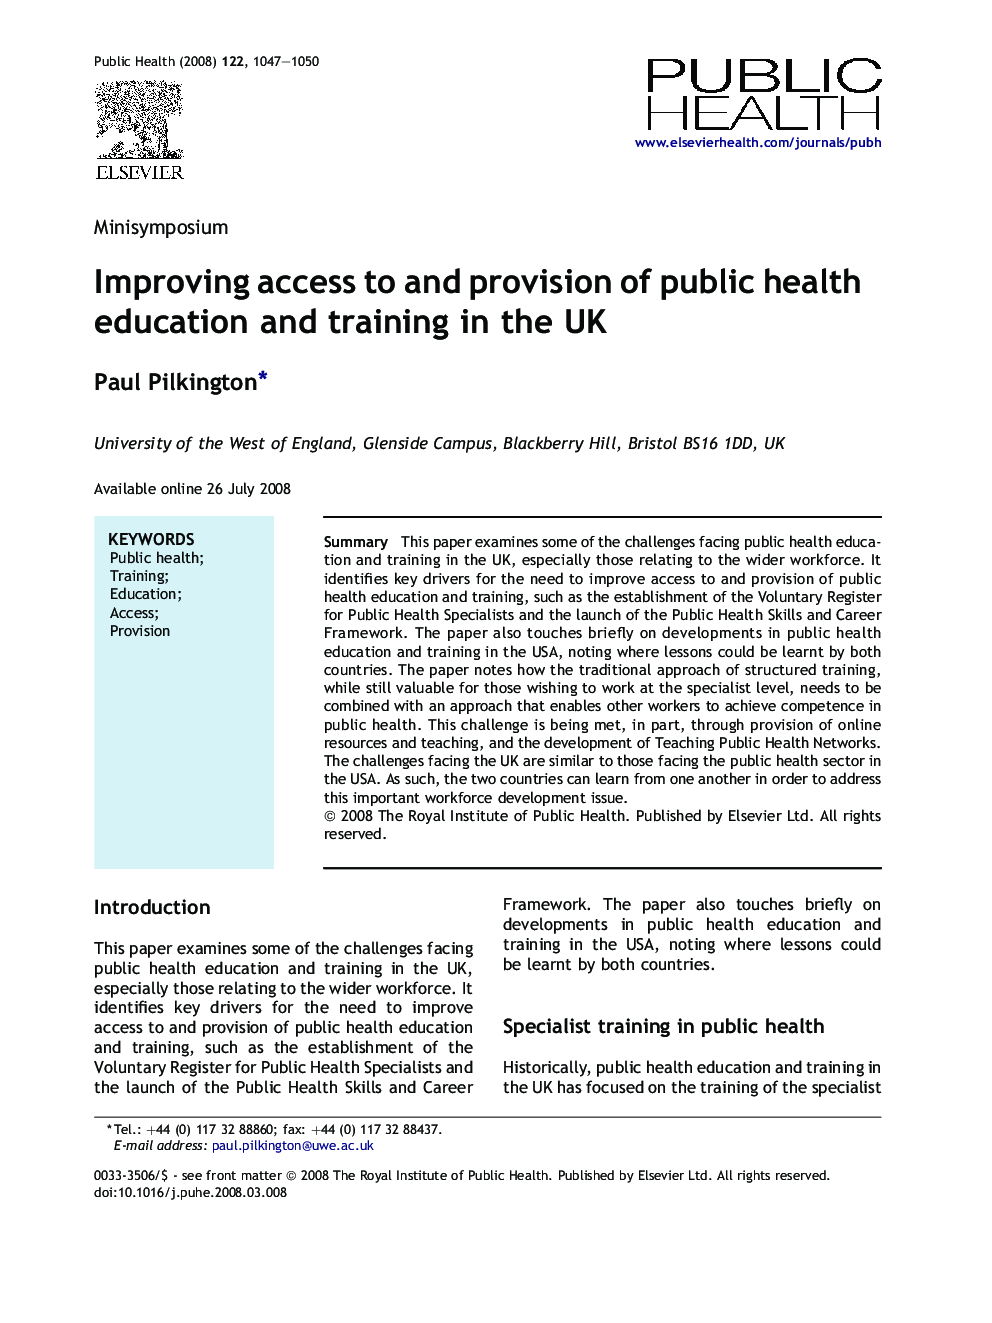 Improving access to and provision of public health education and training in the UK